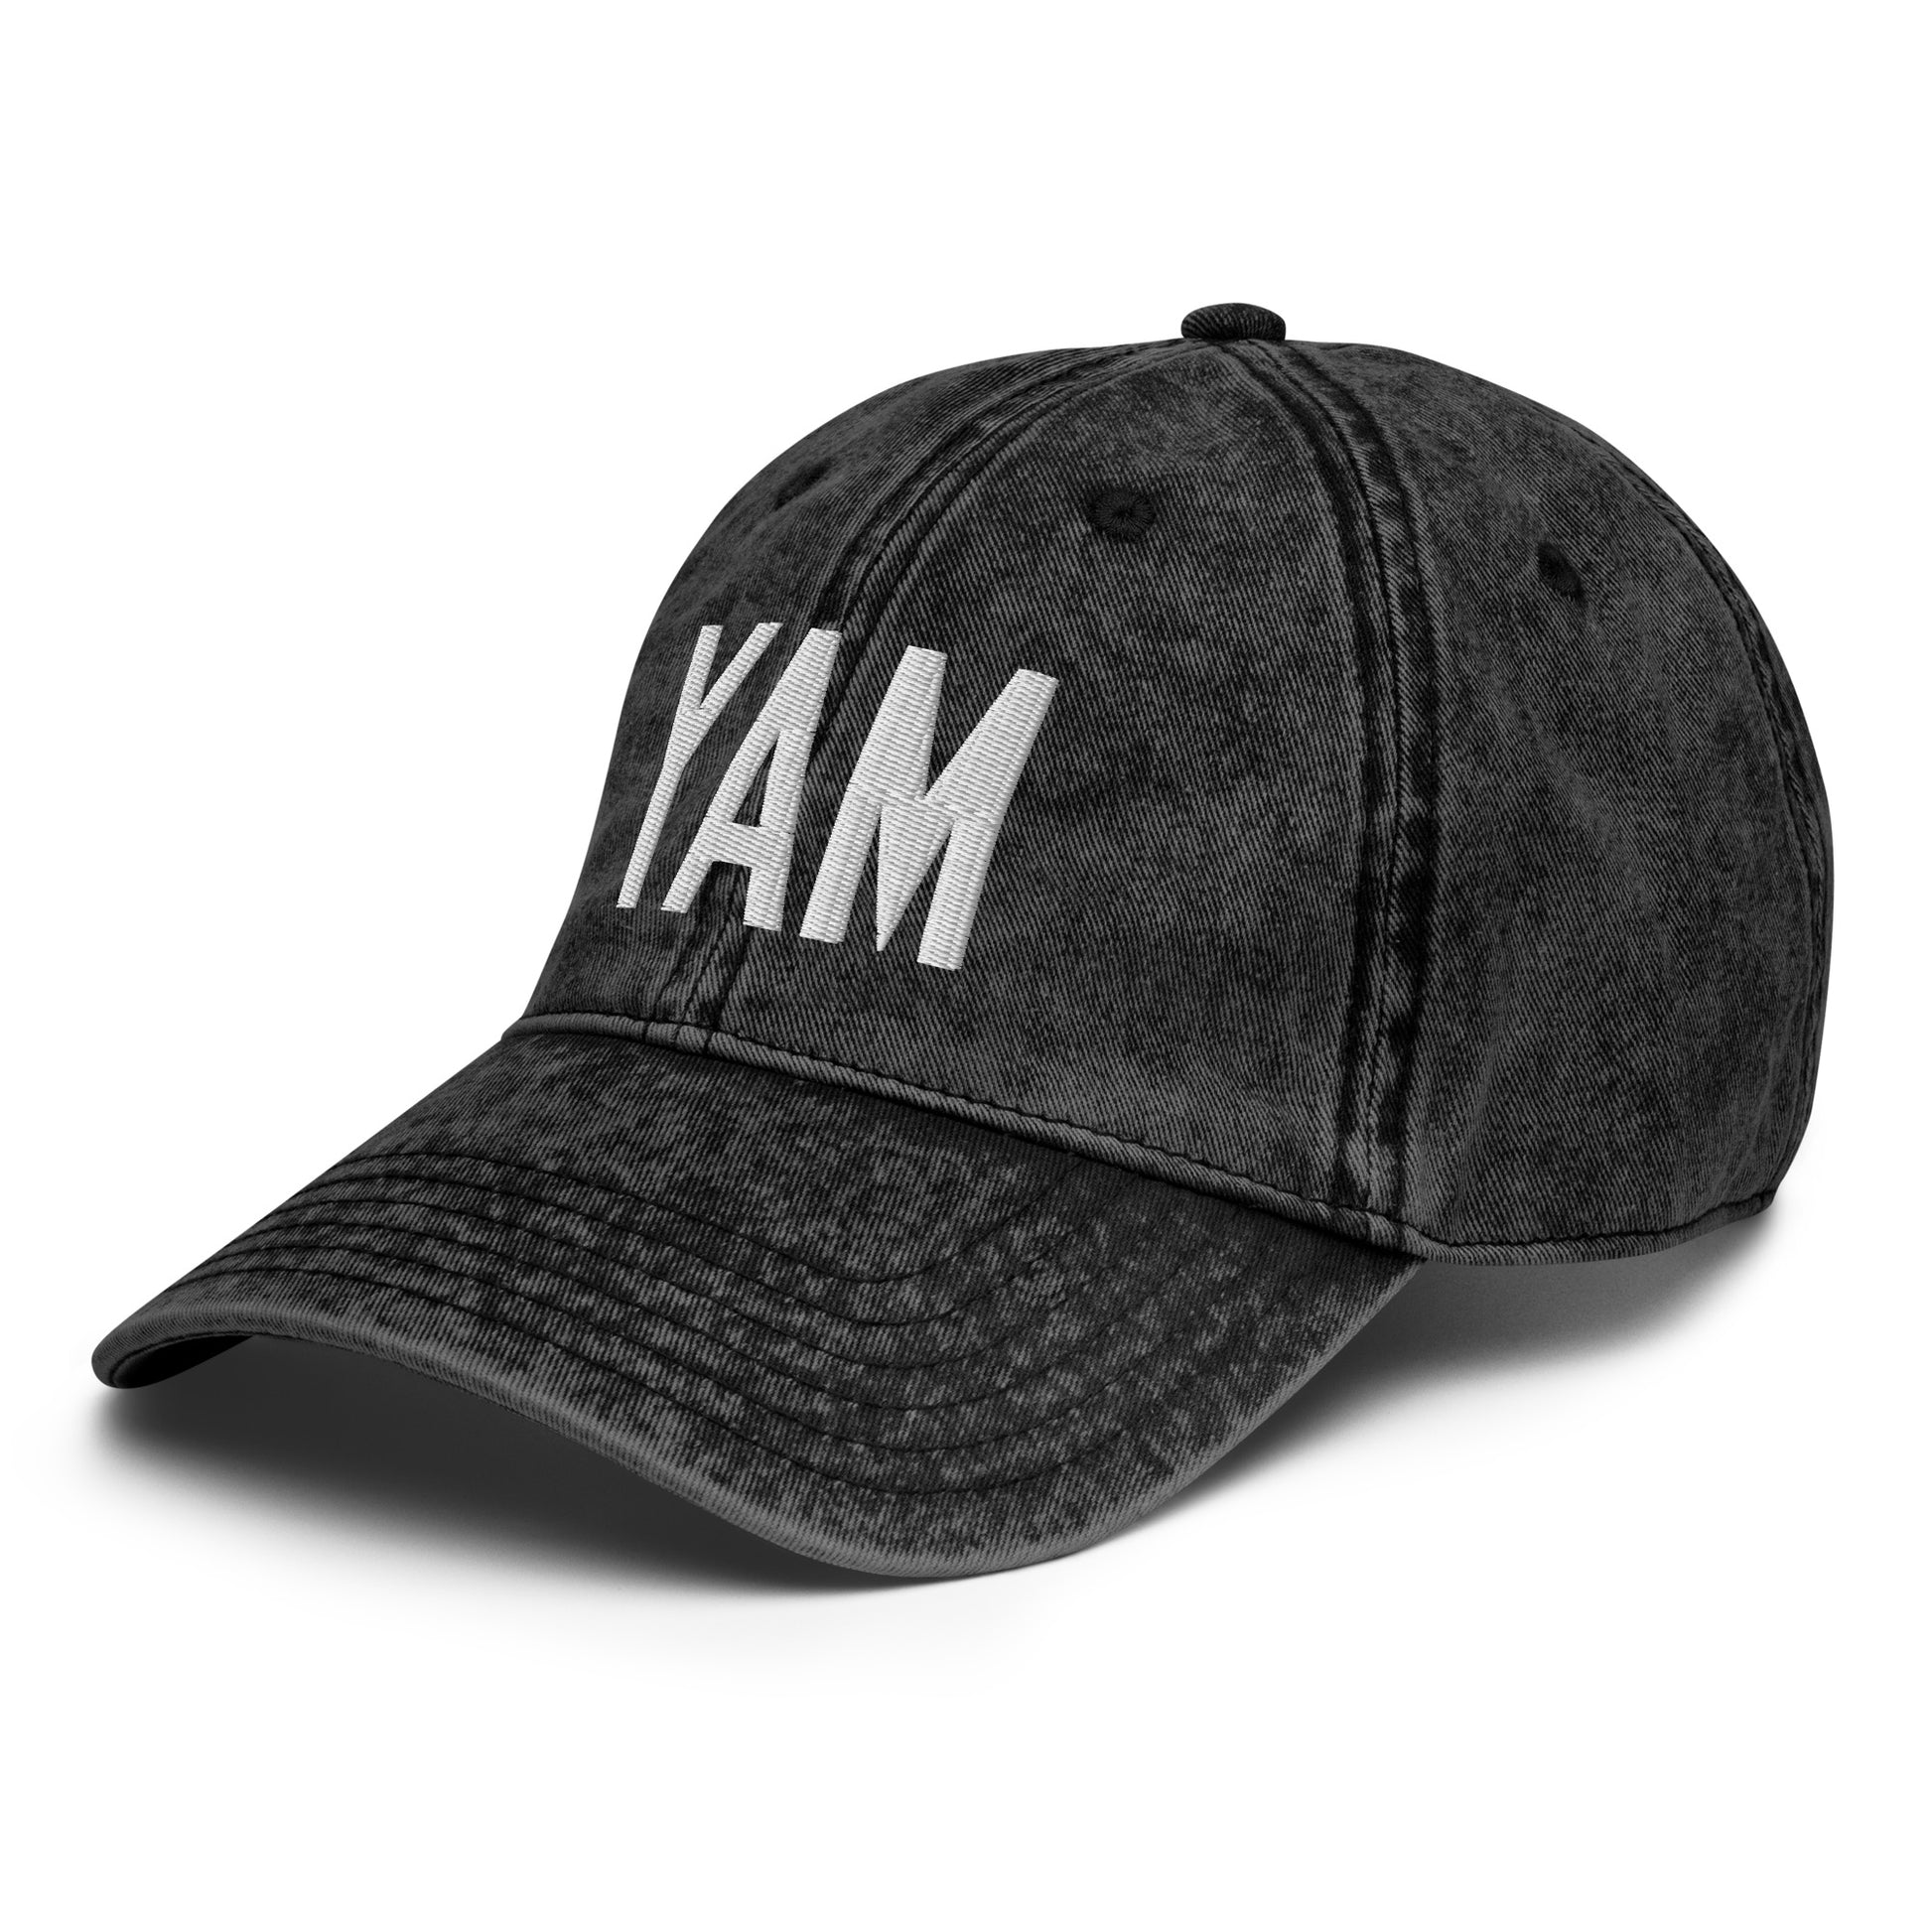 Airport Code Twill Cap - White • YAM Sault-Ste-Marie • YHM Designs - Image 01